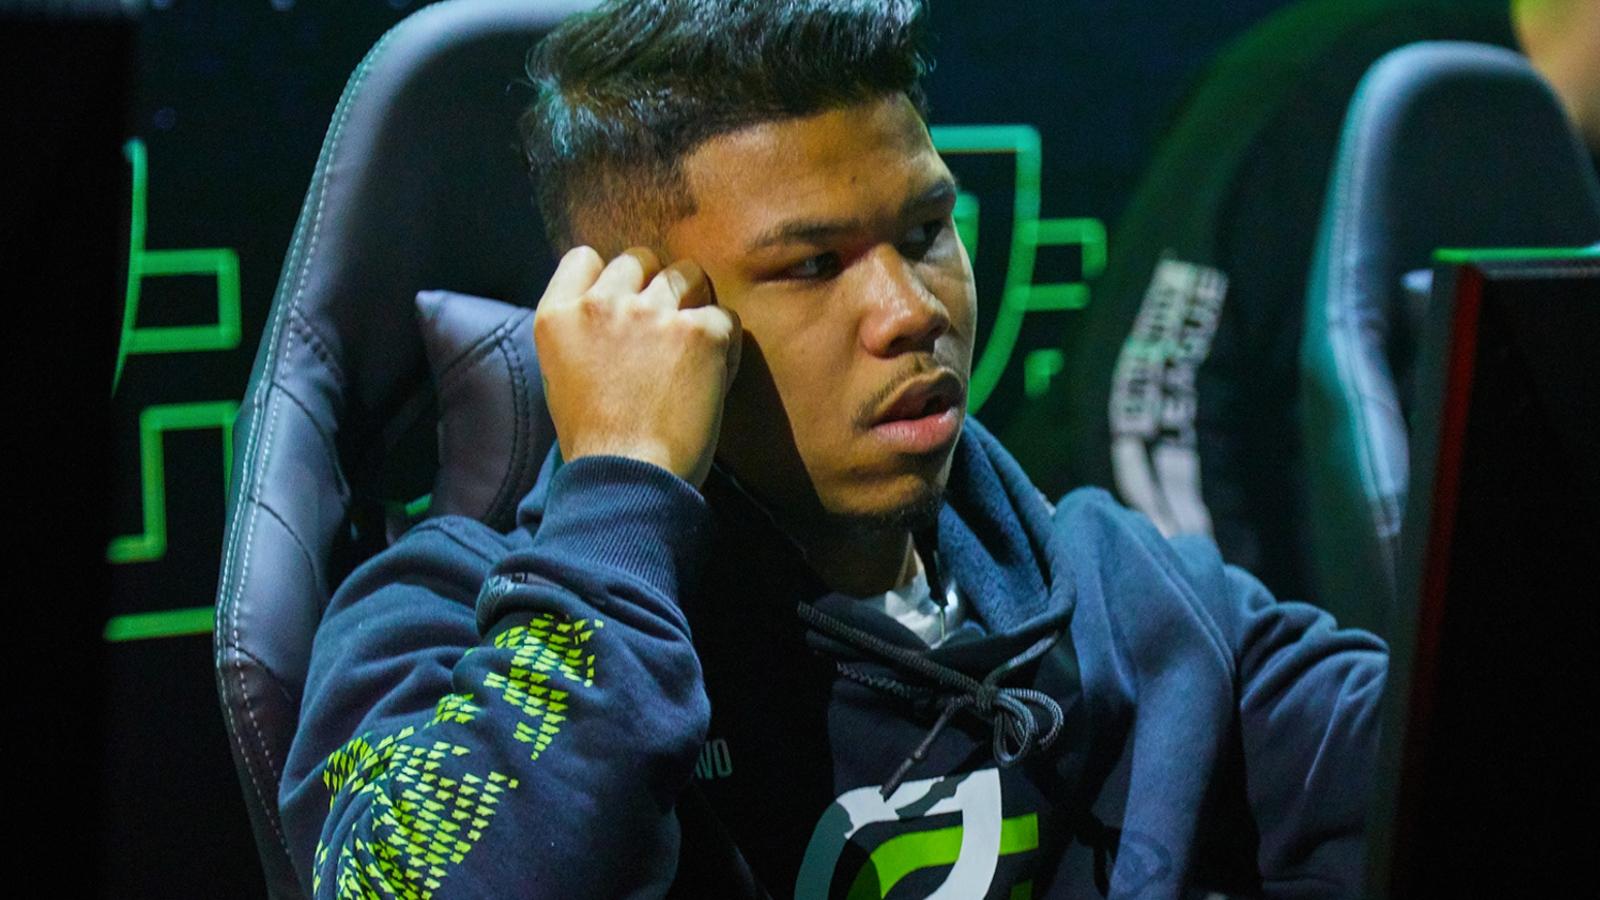 Kenny playing for OpTic Gaming Los Angeles in 2020